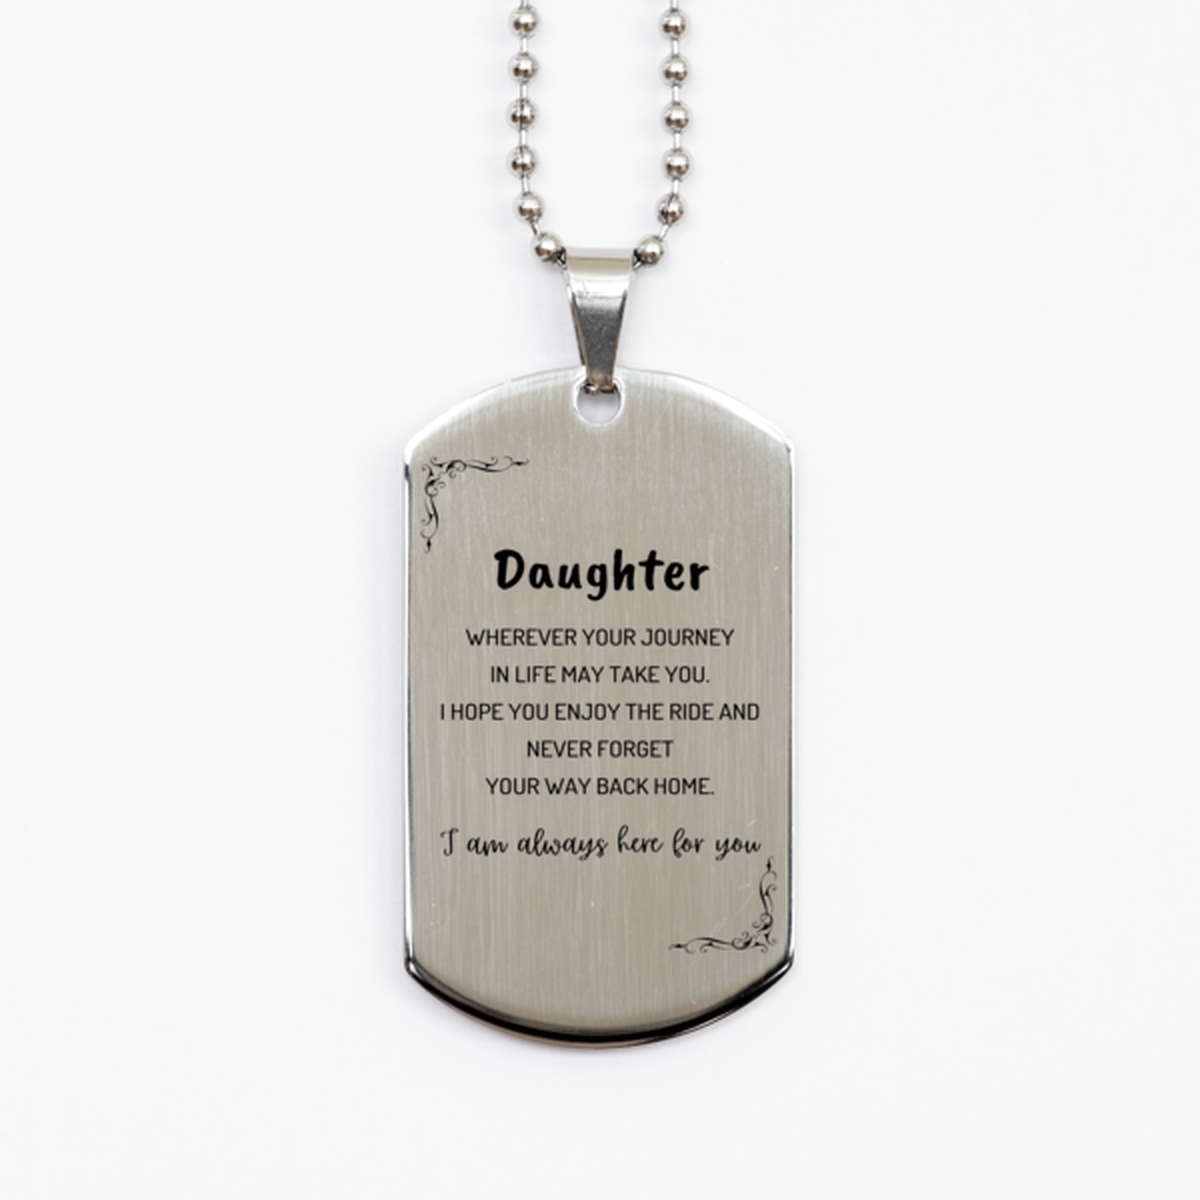 Daughter wherever your journey in life may take you, I am always here for you Daughter Silver Dog Tag, Awesome Christmas Gifts For Daughter, Daughter Birthday Gifts for Men Women Family Loved One